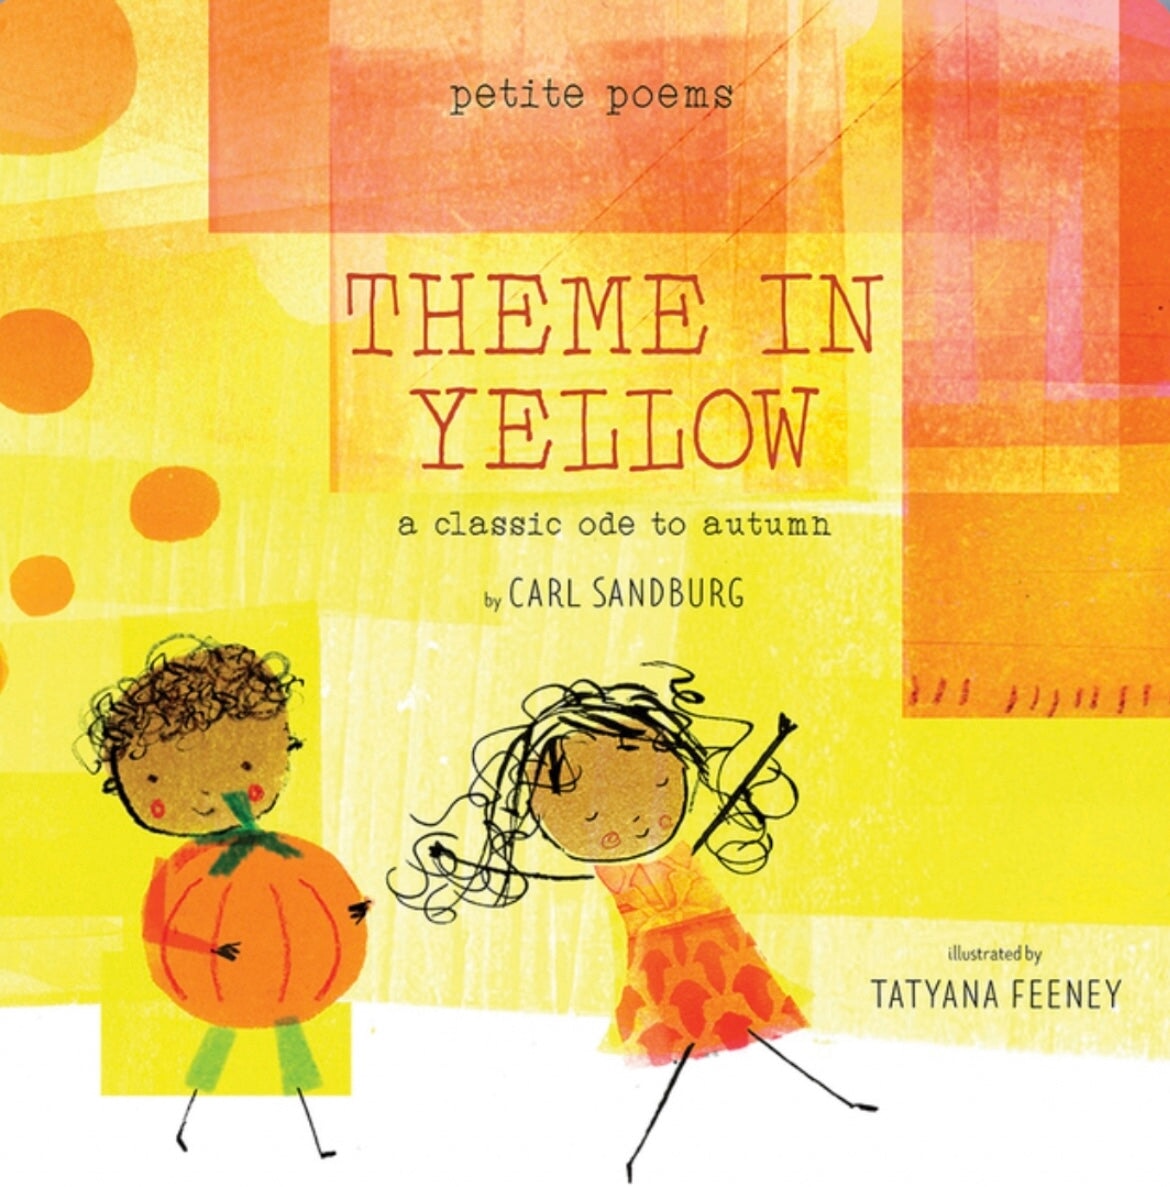 Theme in Yellow: A Classic Ode to Autumn(Petite Poems) Nonfiction - Alder & Alouette